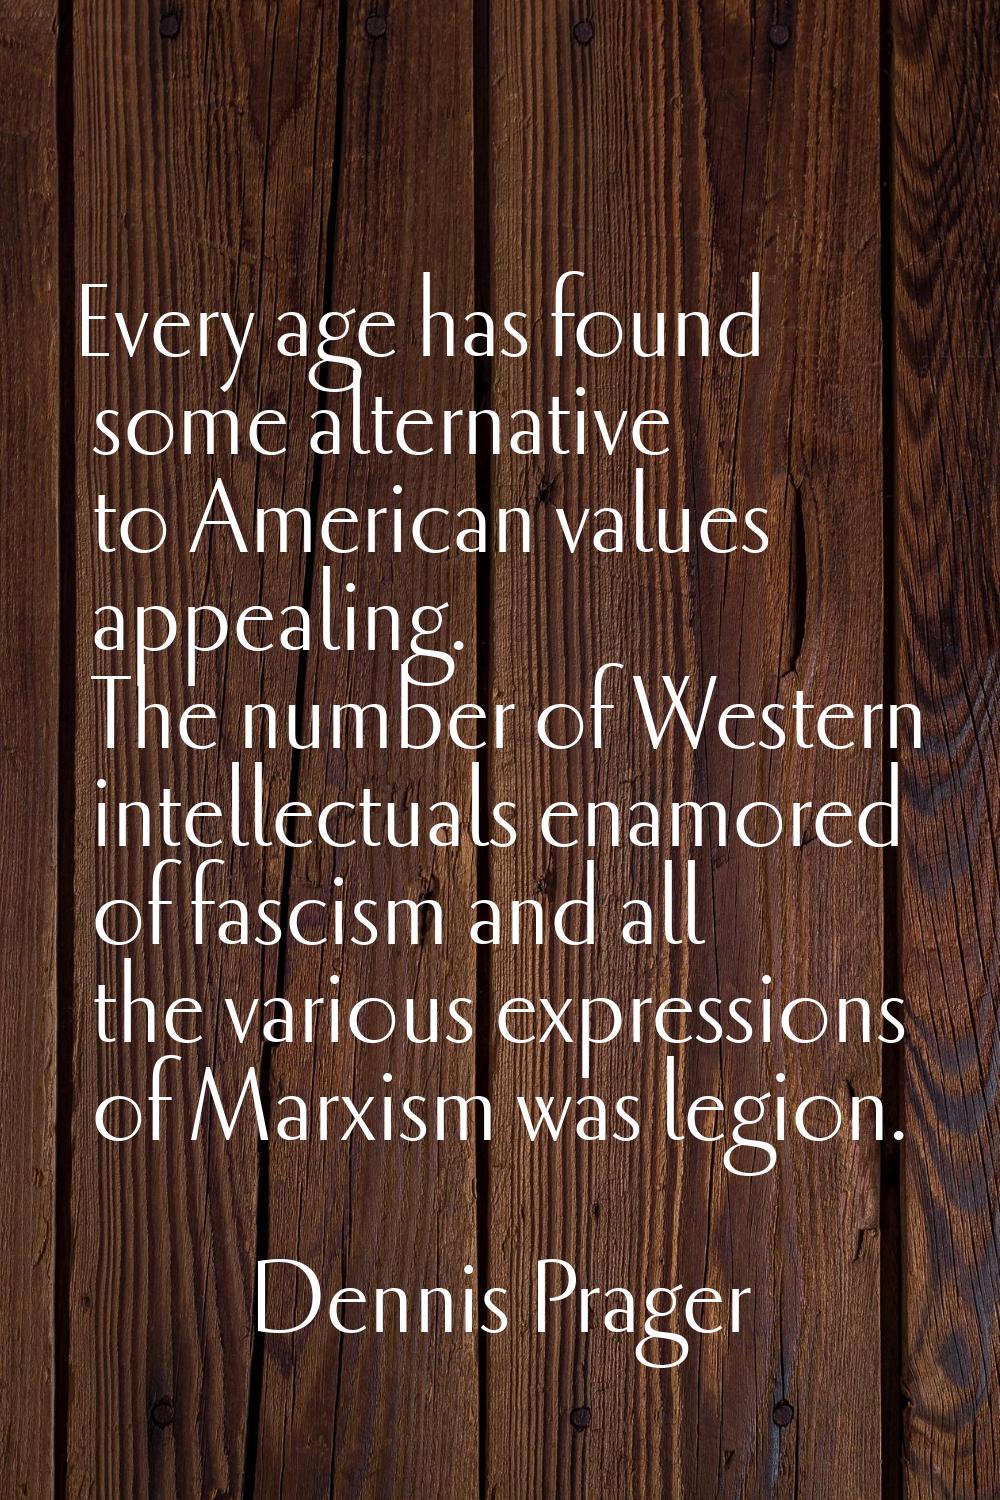 Every age has found some alternative to American values appealing. The number of Western intellectu